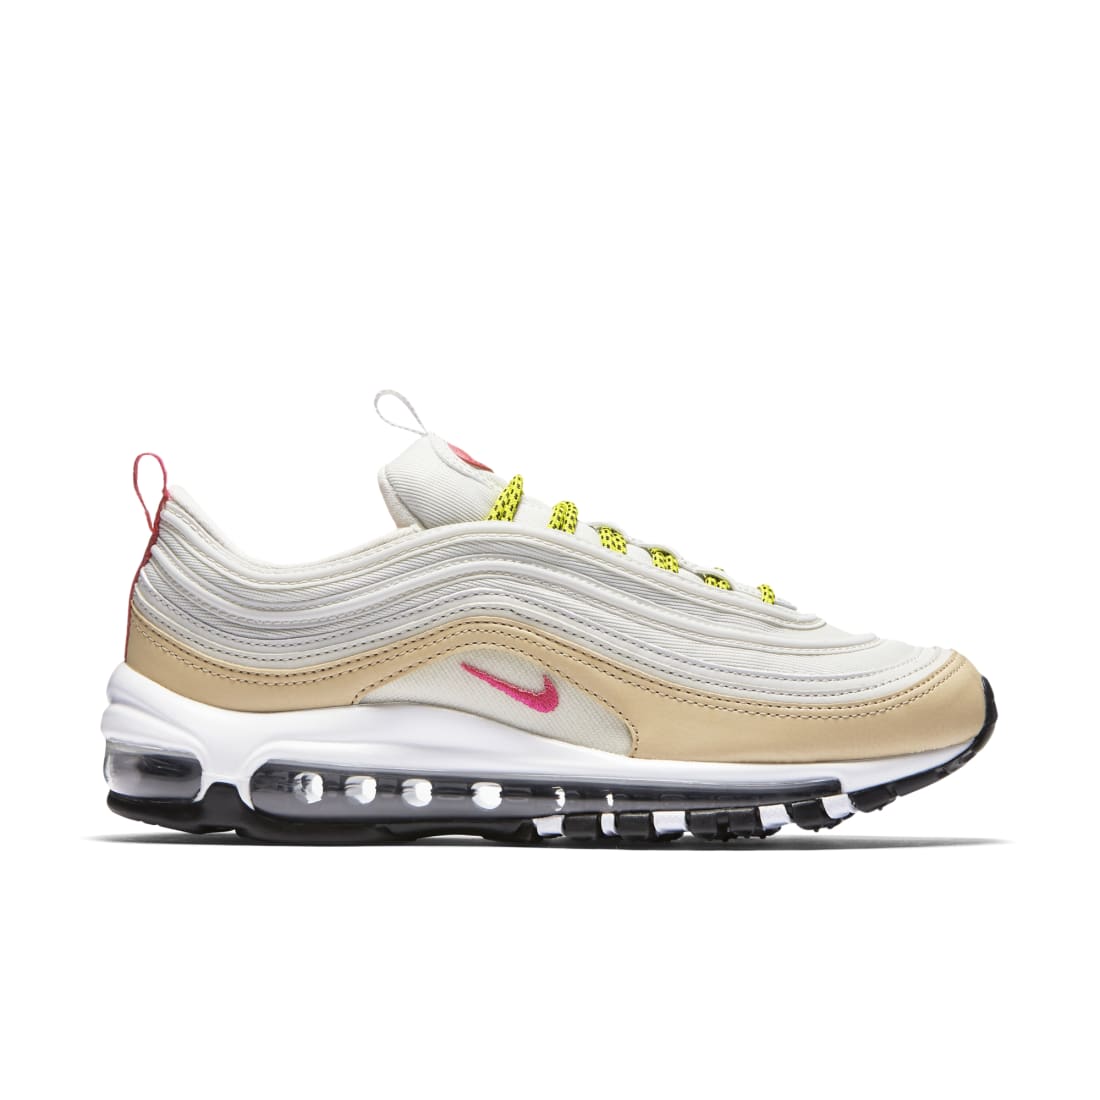 Nike Air Max 97 Light Bone Deadly Pink | Nike | Release Dates 